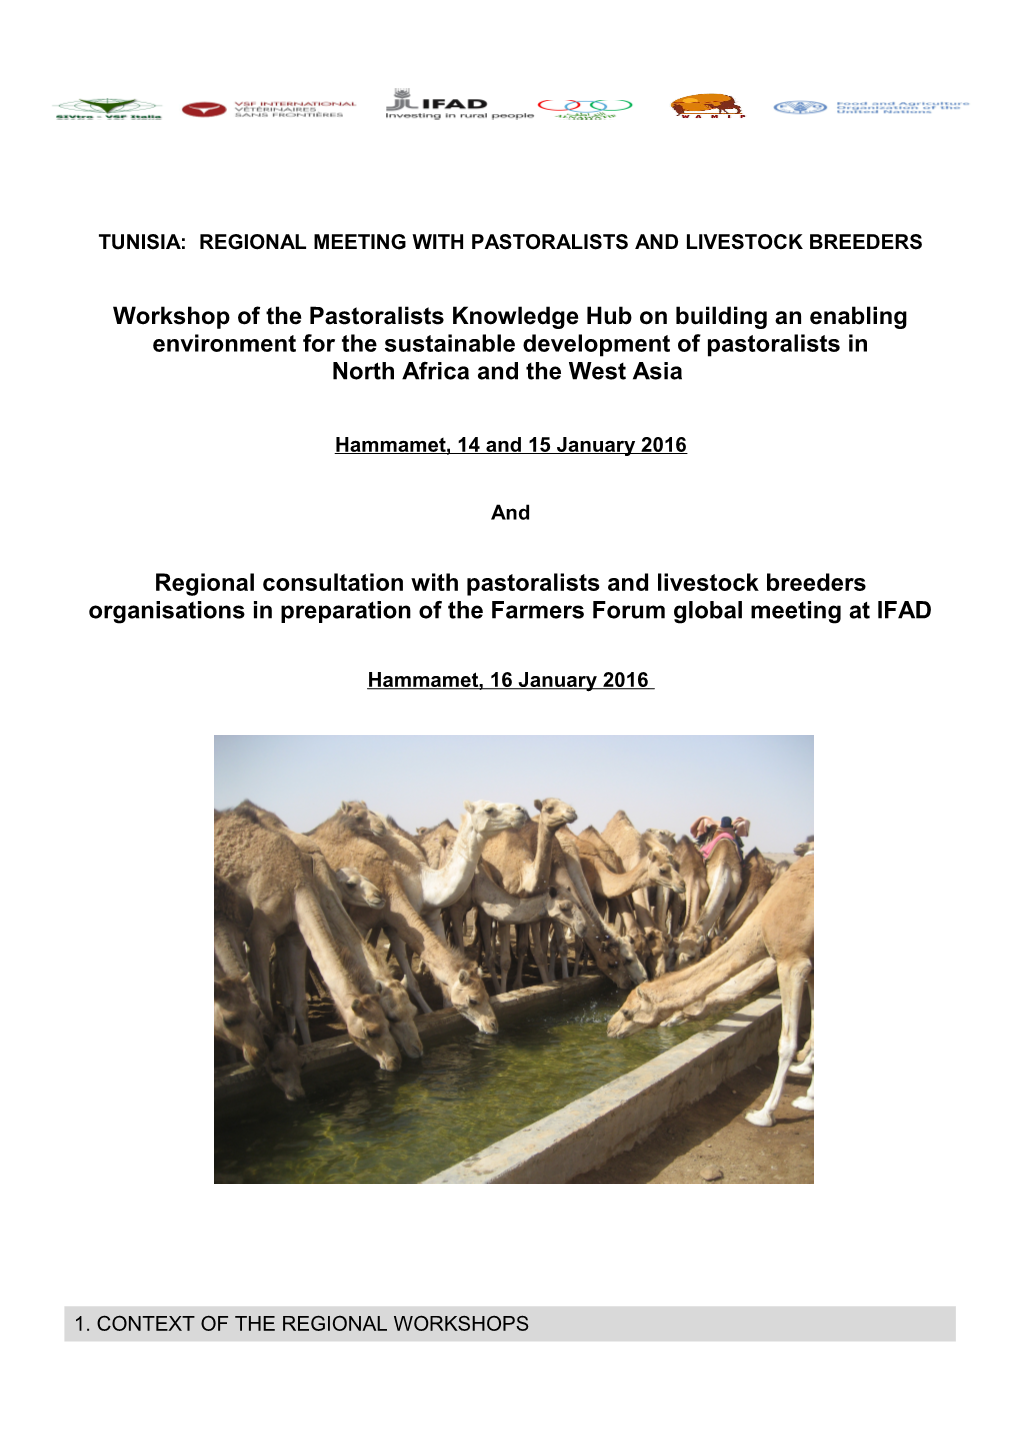 Tunisia: Regional Meeting with Pastoralists and Livestock Breeders